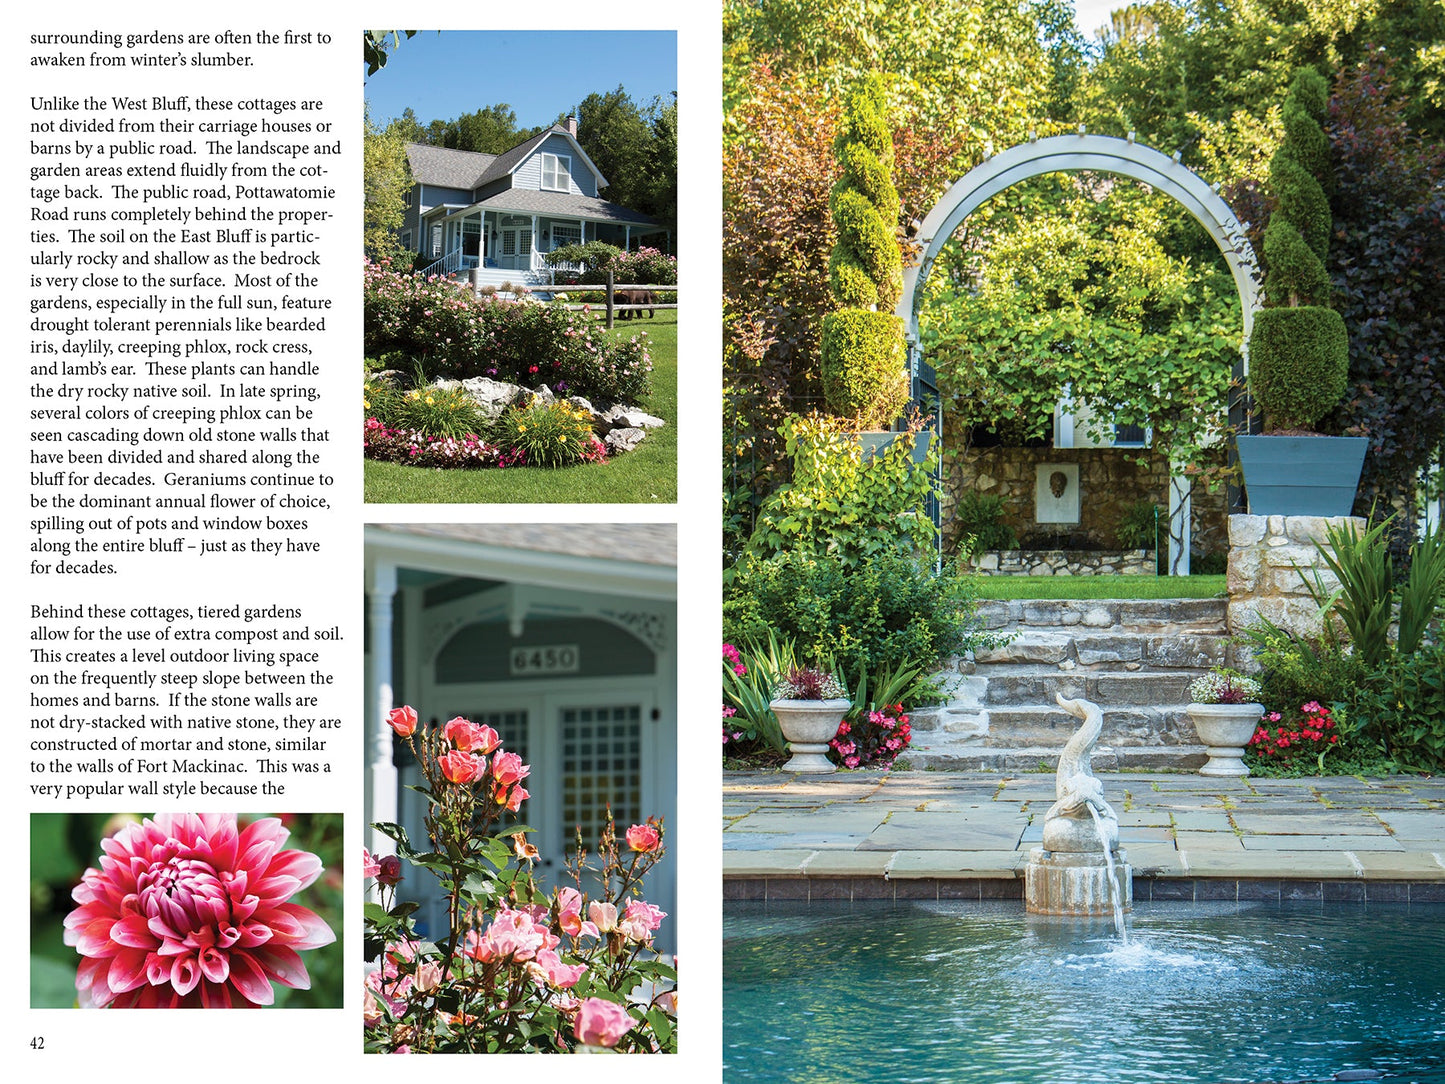 An Introduction to the Gardens of Mackinac Island Book